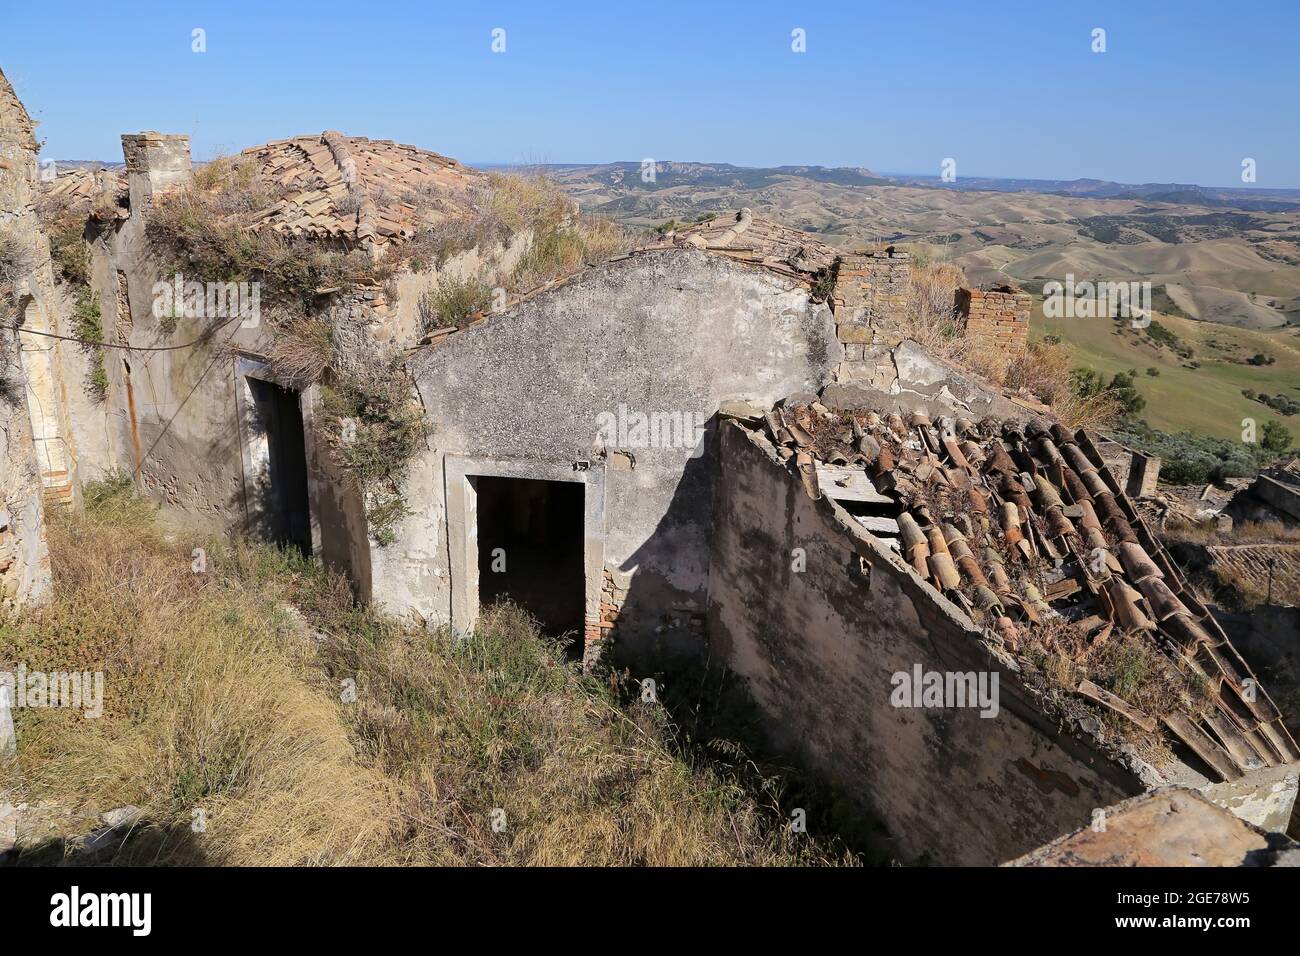 Scenic view of Craco ruins, ghost town abandoned after a landslide, Basilicata region, southern Italy Stock Photo